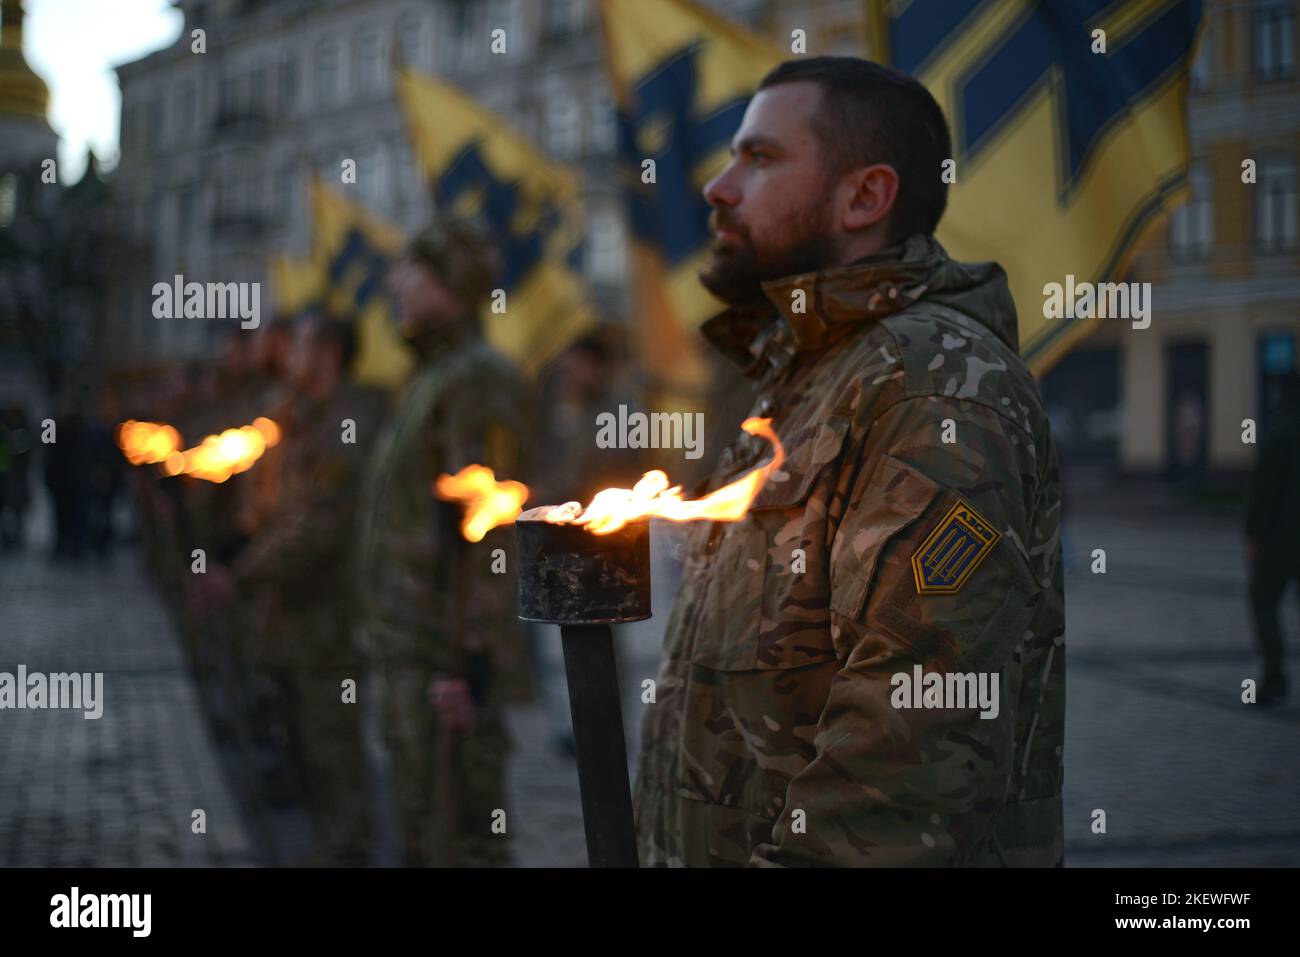 KYIV, UKRAINE - NOVEMBER 13, 2022 - Soldiers of Azov regiment hold burning torches to commemorate their fallen brothers in arms during the Heavenly Regiment of Azov mystery in Sofiyska Square, Kyiv, capital of Ukraine. Stock Photo